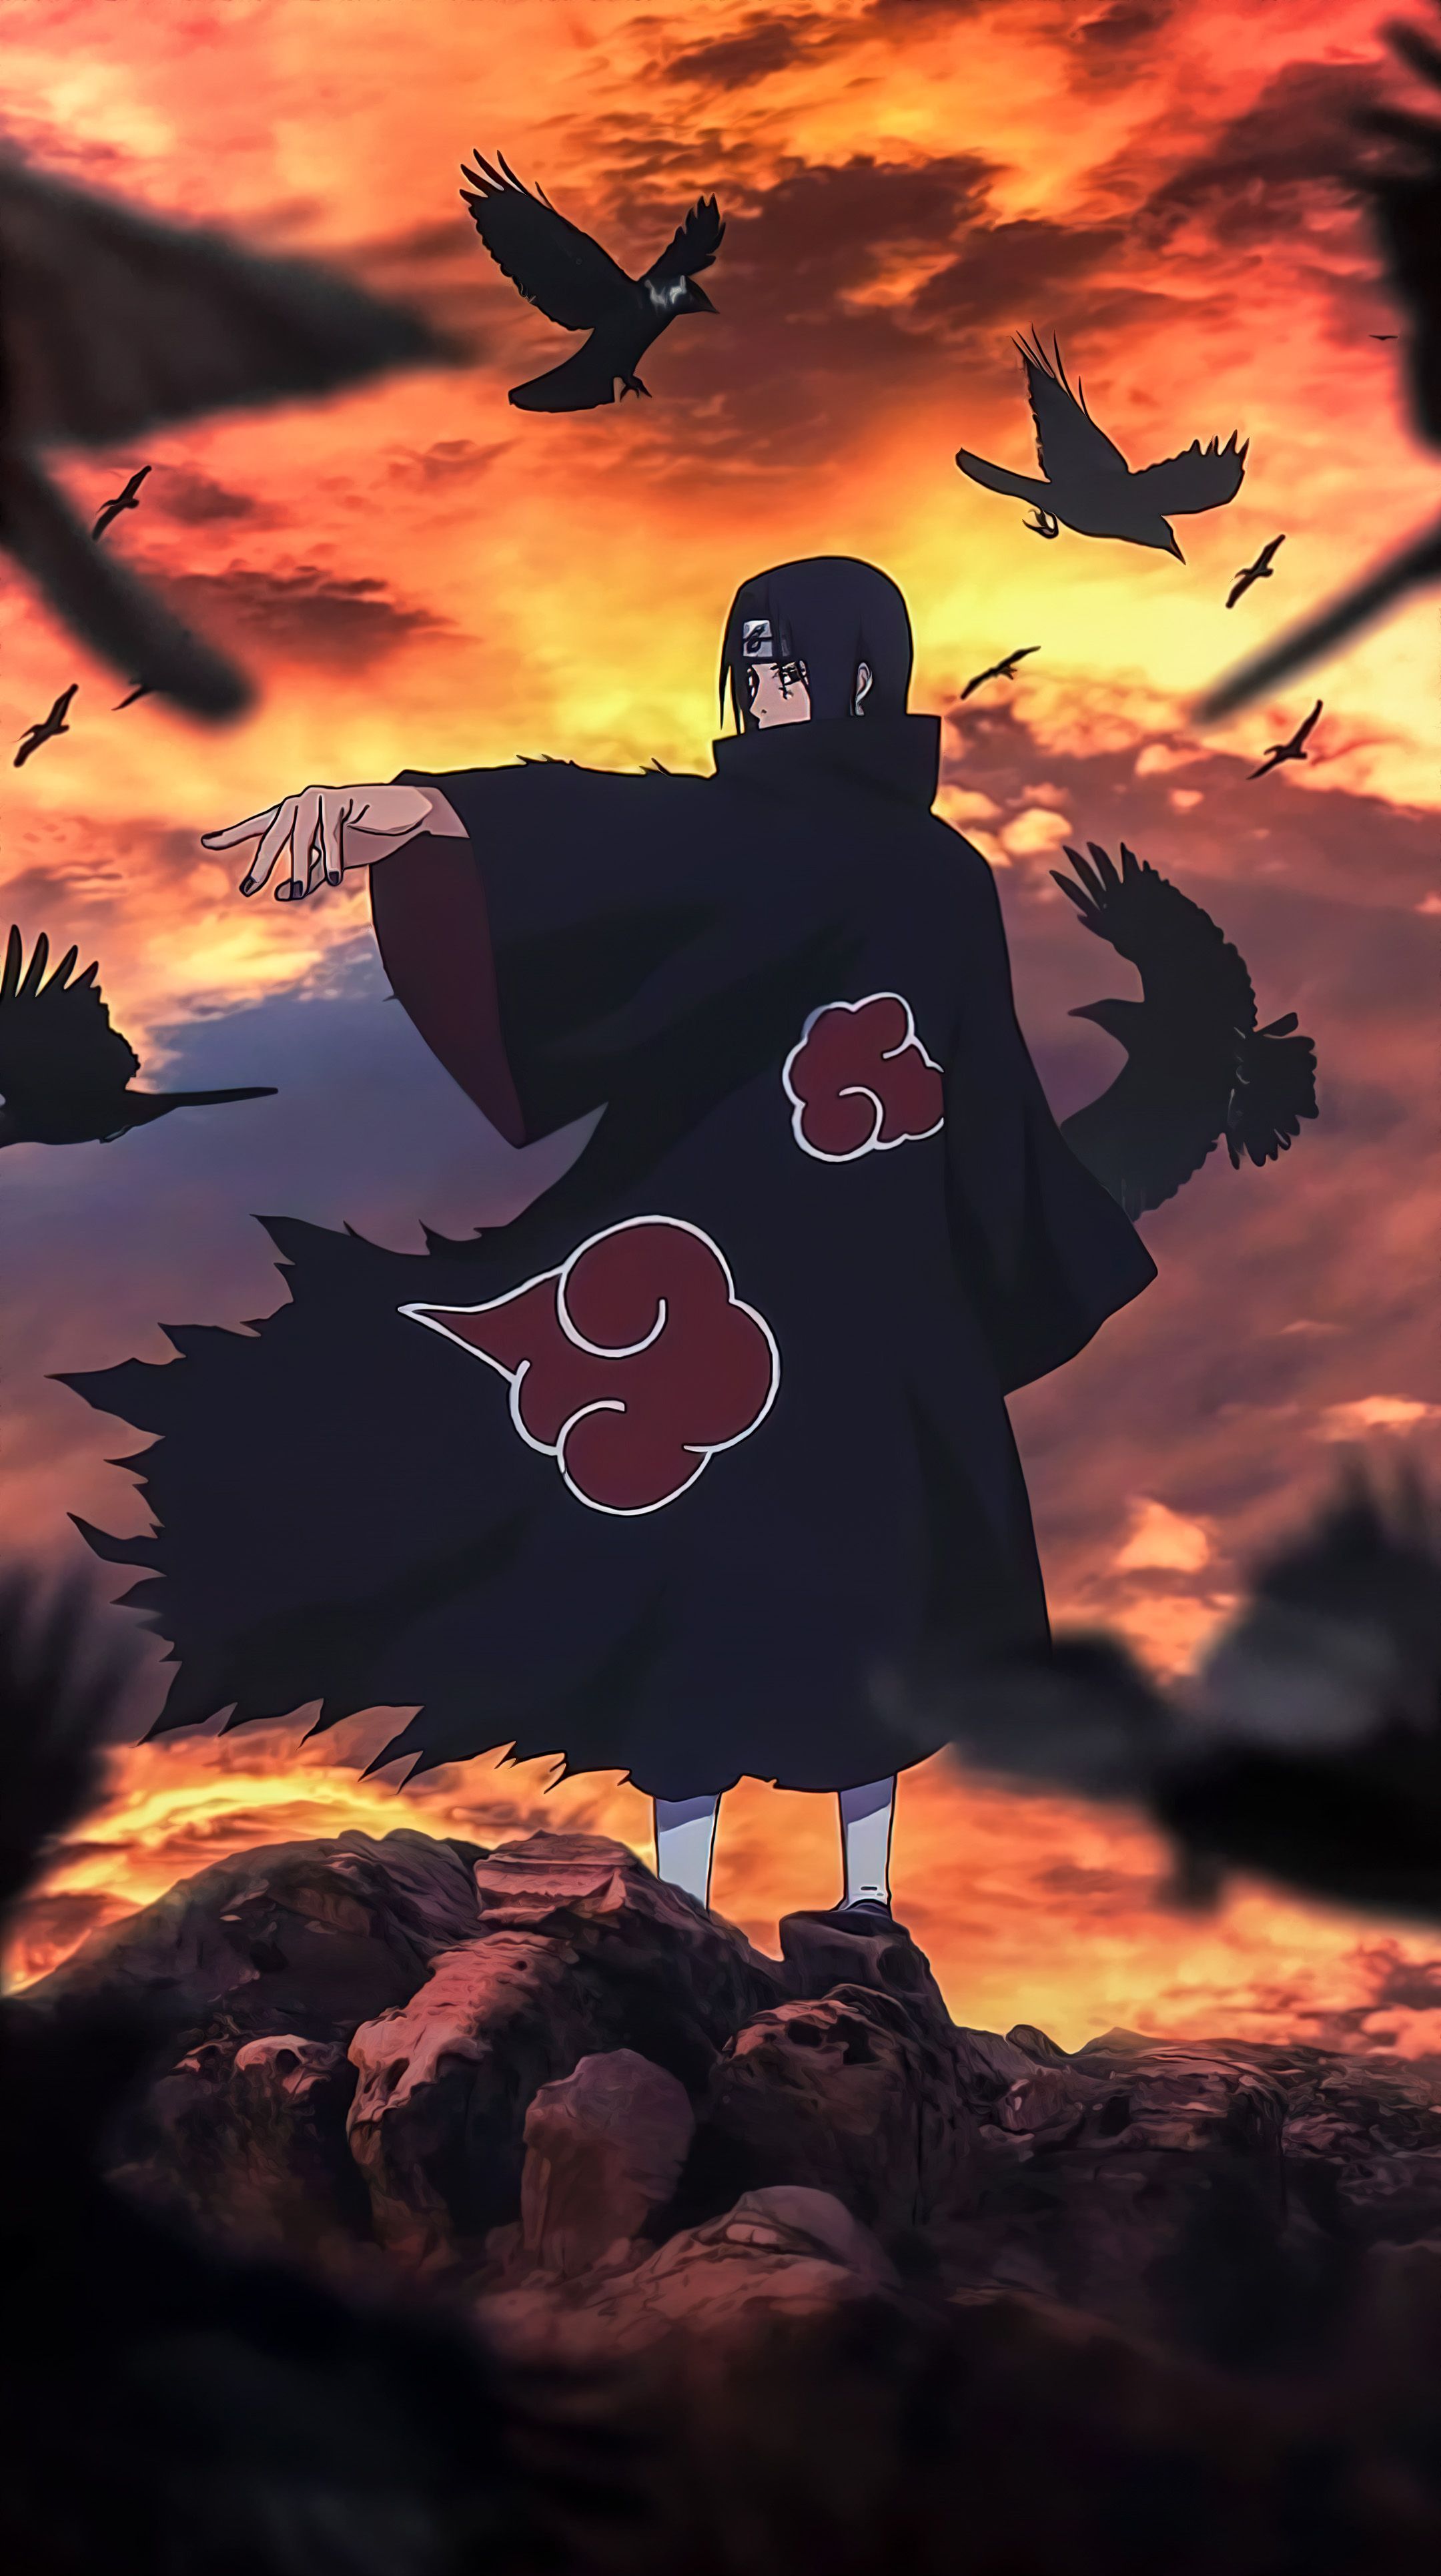 Akatsuki Wallpaper 4K iPhone / Akatsuki Naruto Wallpaper Kolpaper Awesome Free HD Wallpaper / Akatsuki was a group of shinobi that existed outside the usual system of hidden villages